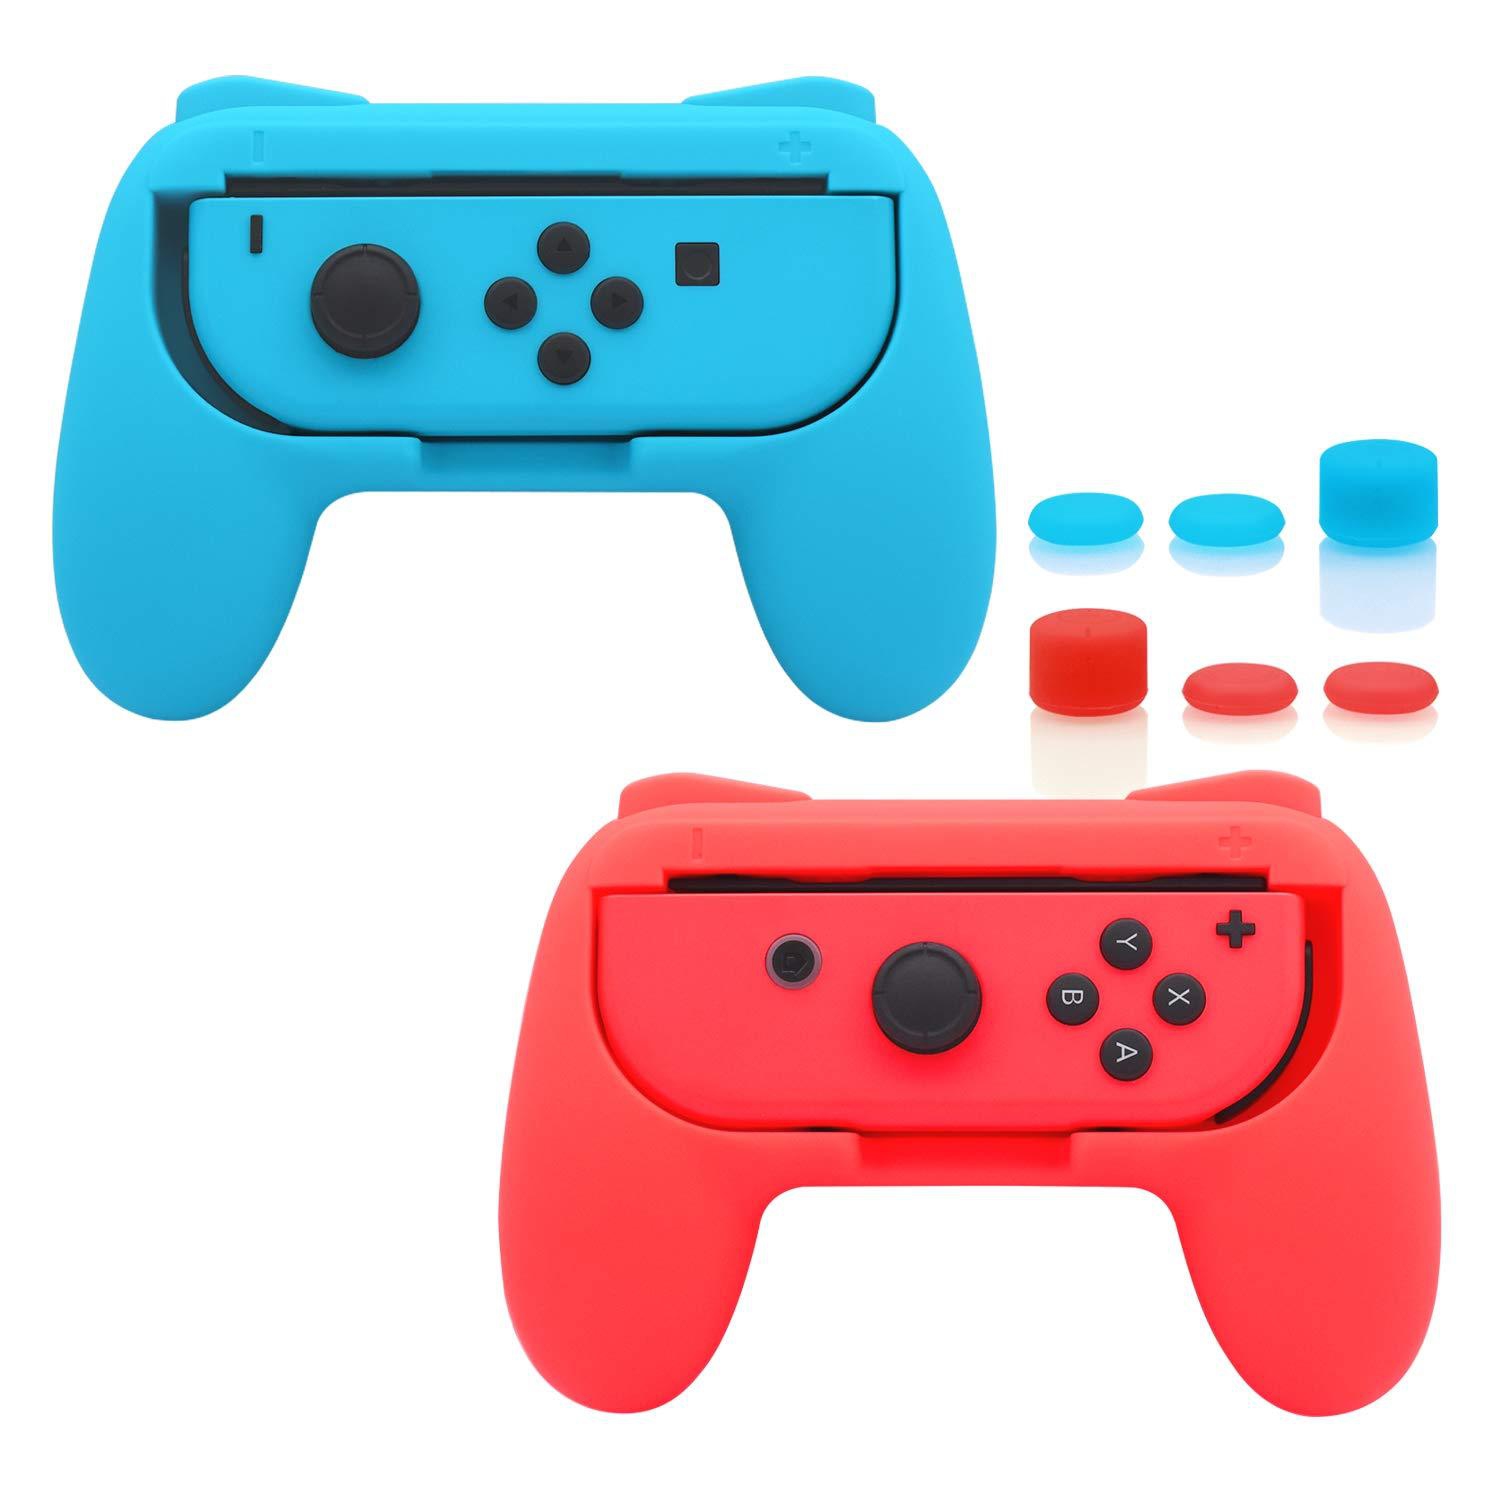 FastSnail Grip Kit for Nintendo Switch Joy-Con Controller (Blue Blue and Red